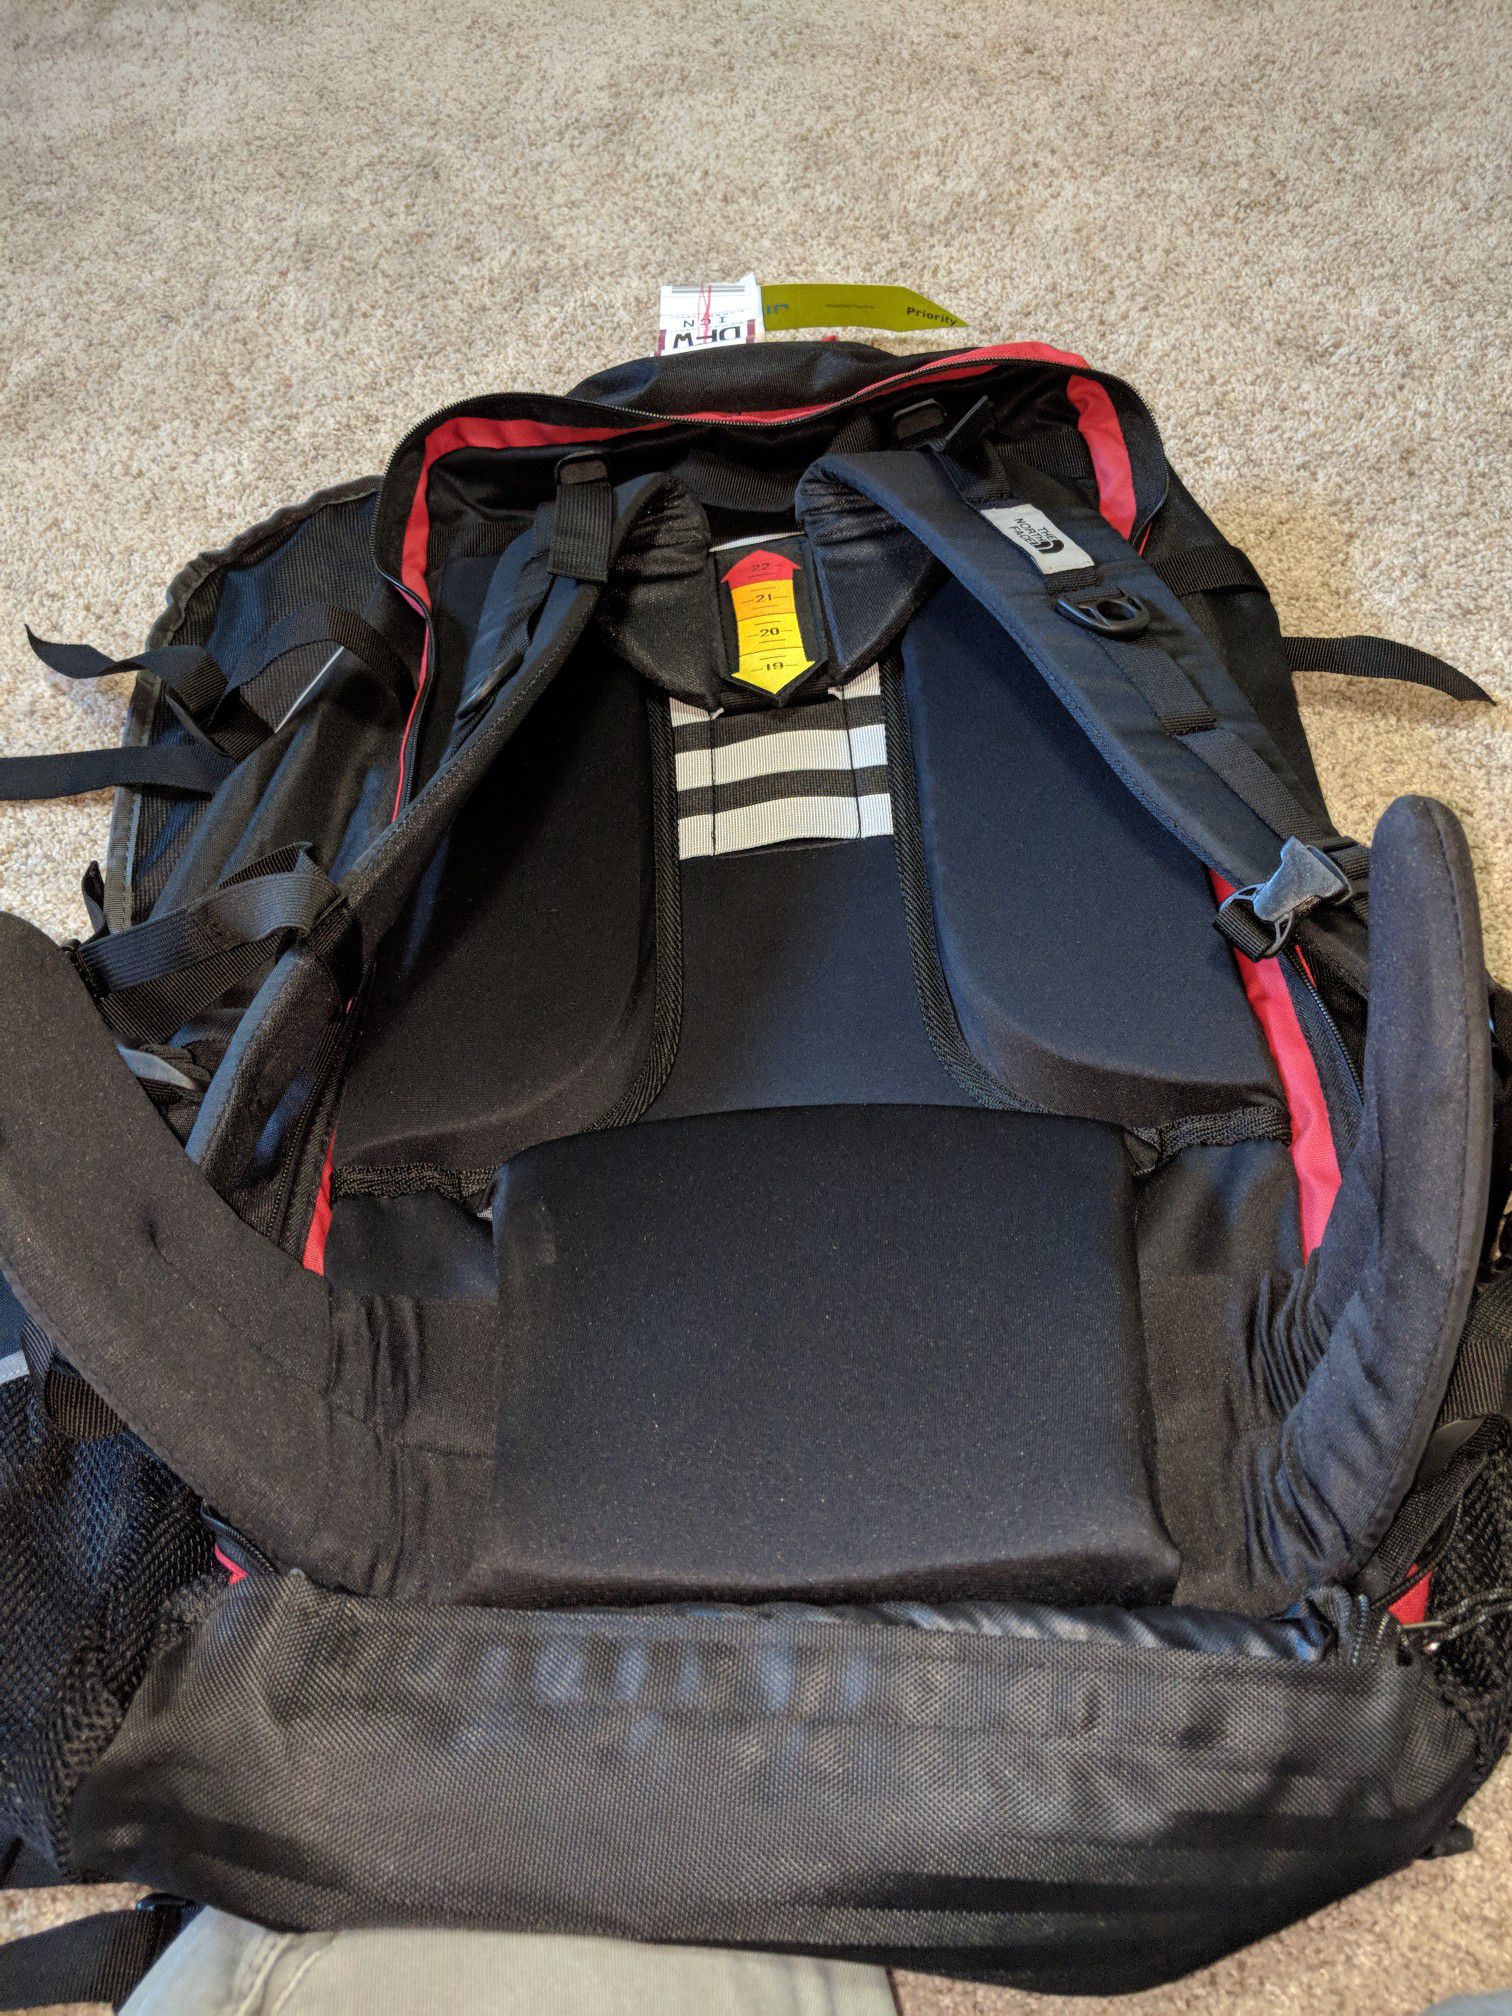 Northface backpacking bag with detachable backpack and Fannie pack